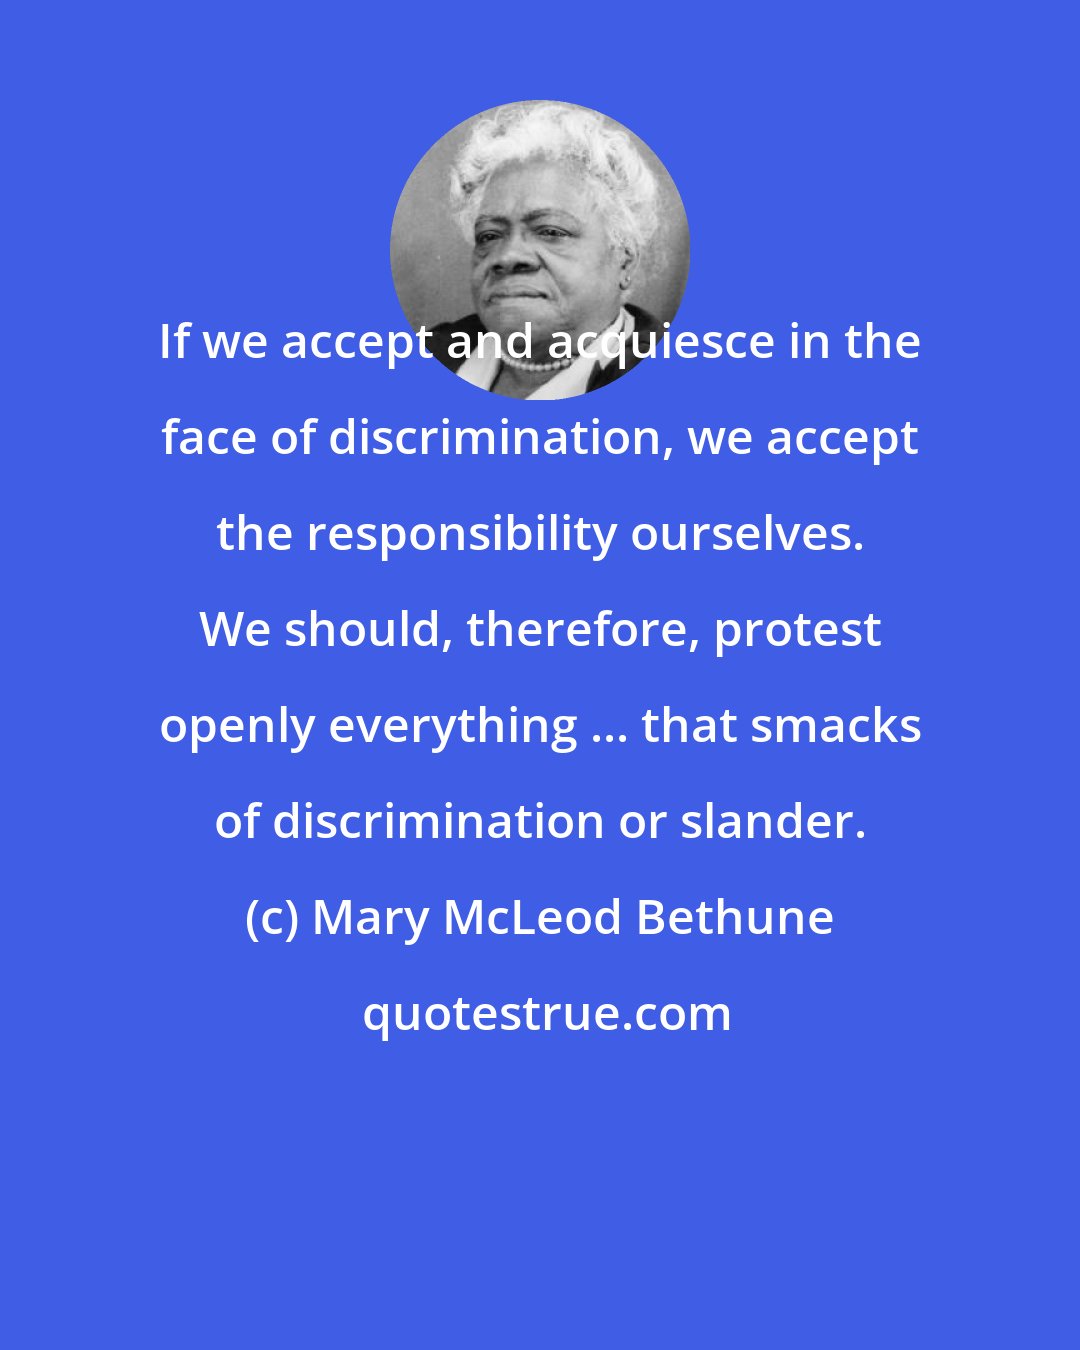 Mary McLeod Bethune: If we accept and acquiesce in the face of discrimination, we accept the responsibility ourselves. We should, therefore, protest openly everything ... that smacks of discrimination or slander.